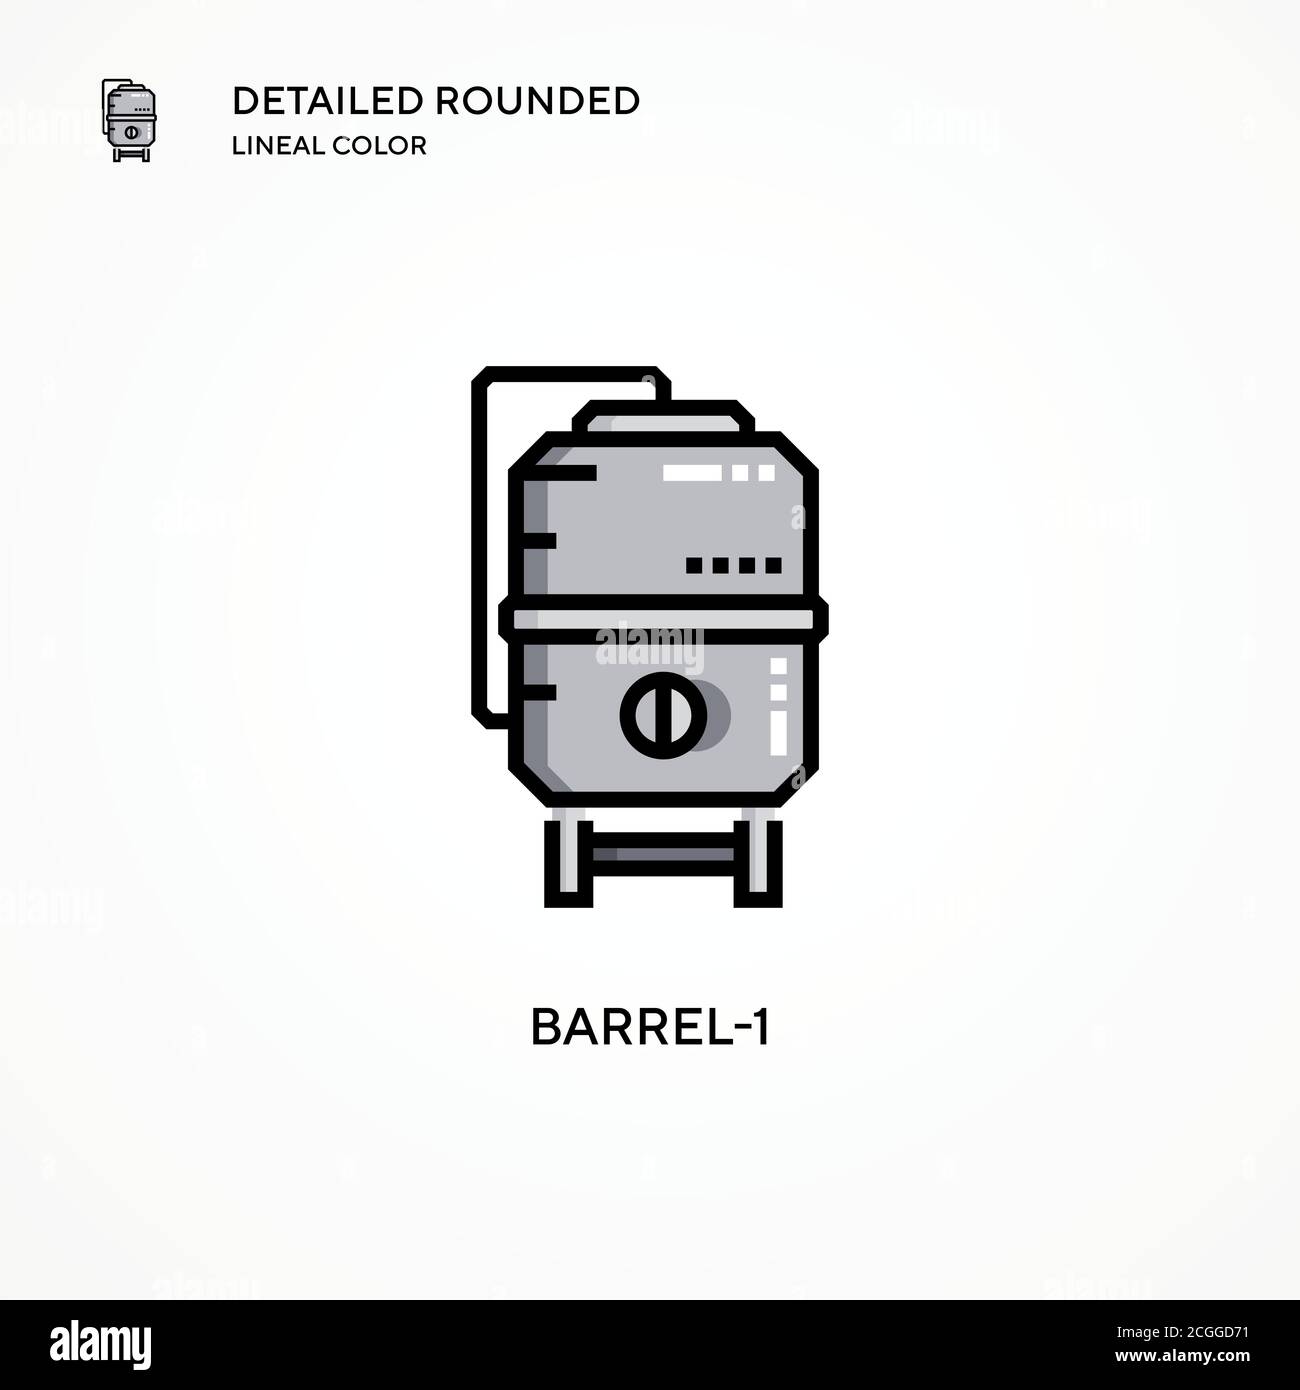 Barrel-1 vector icon. Modern vector illustration concepts. Easy to edit and customize. Stock Vector